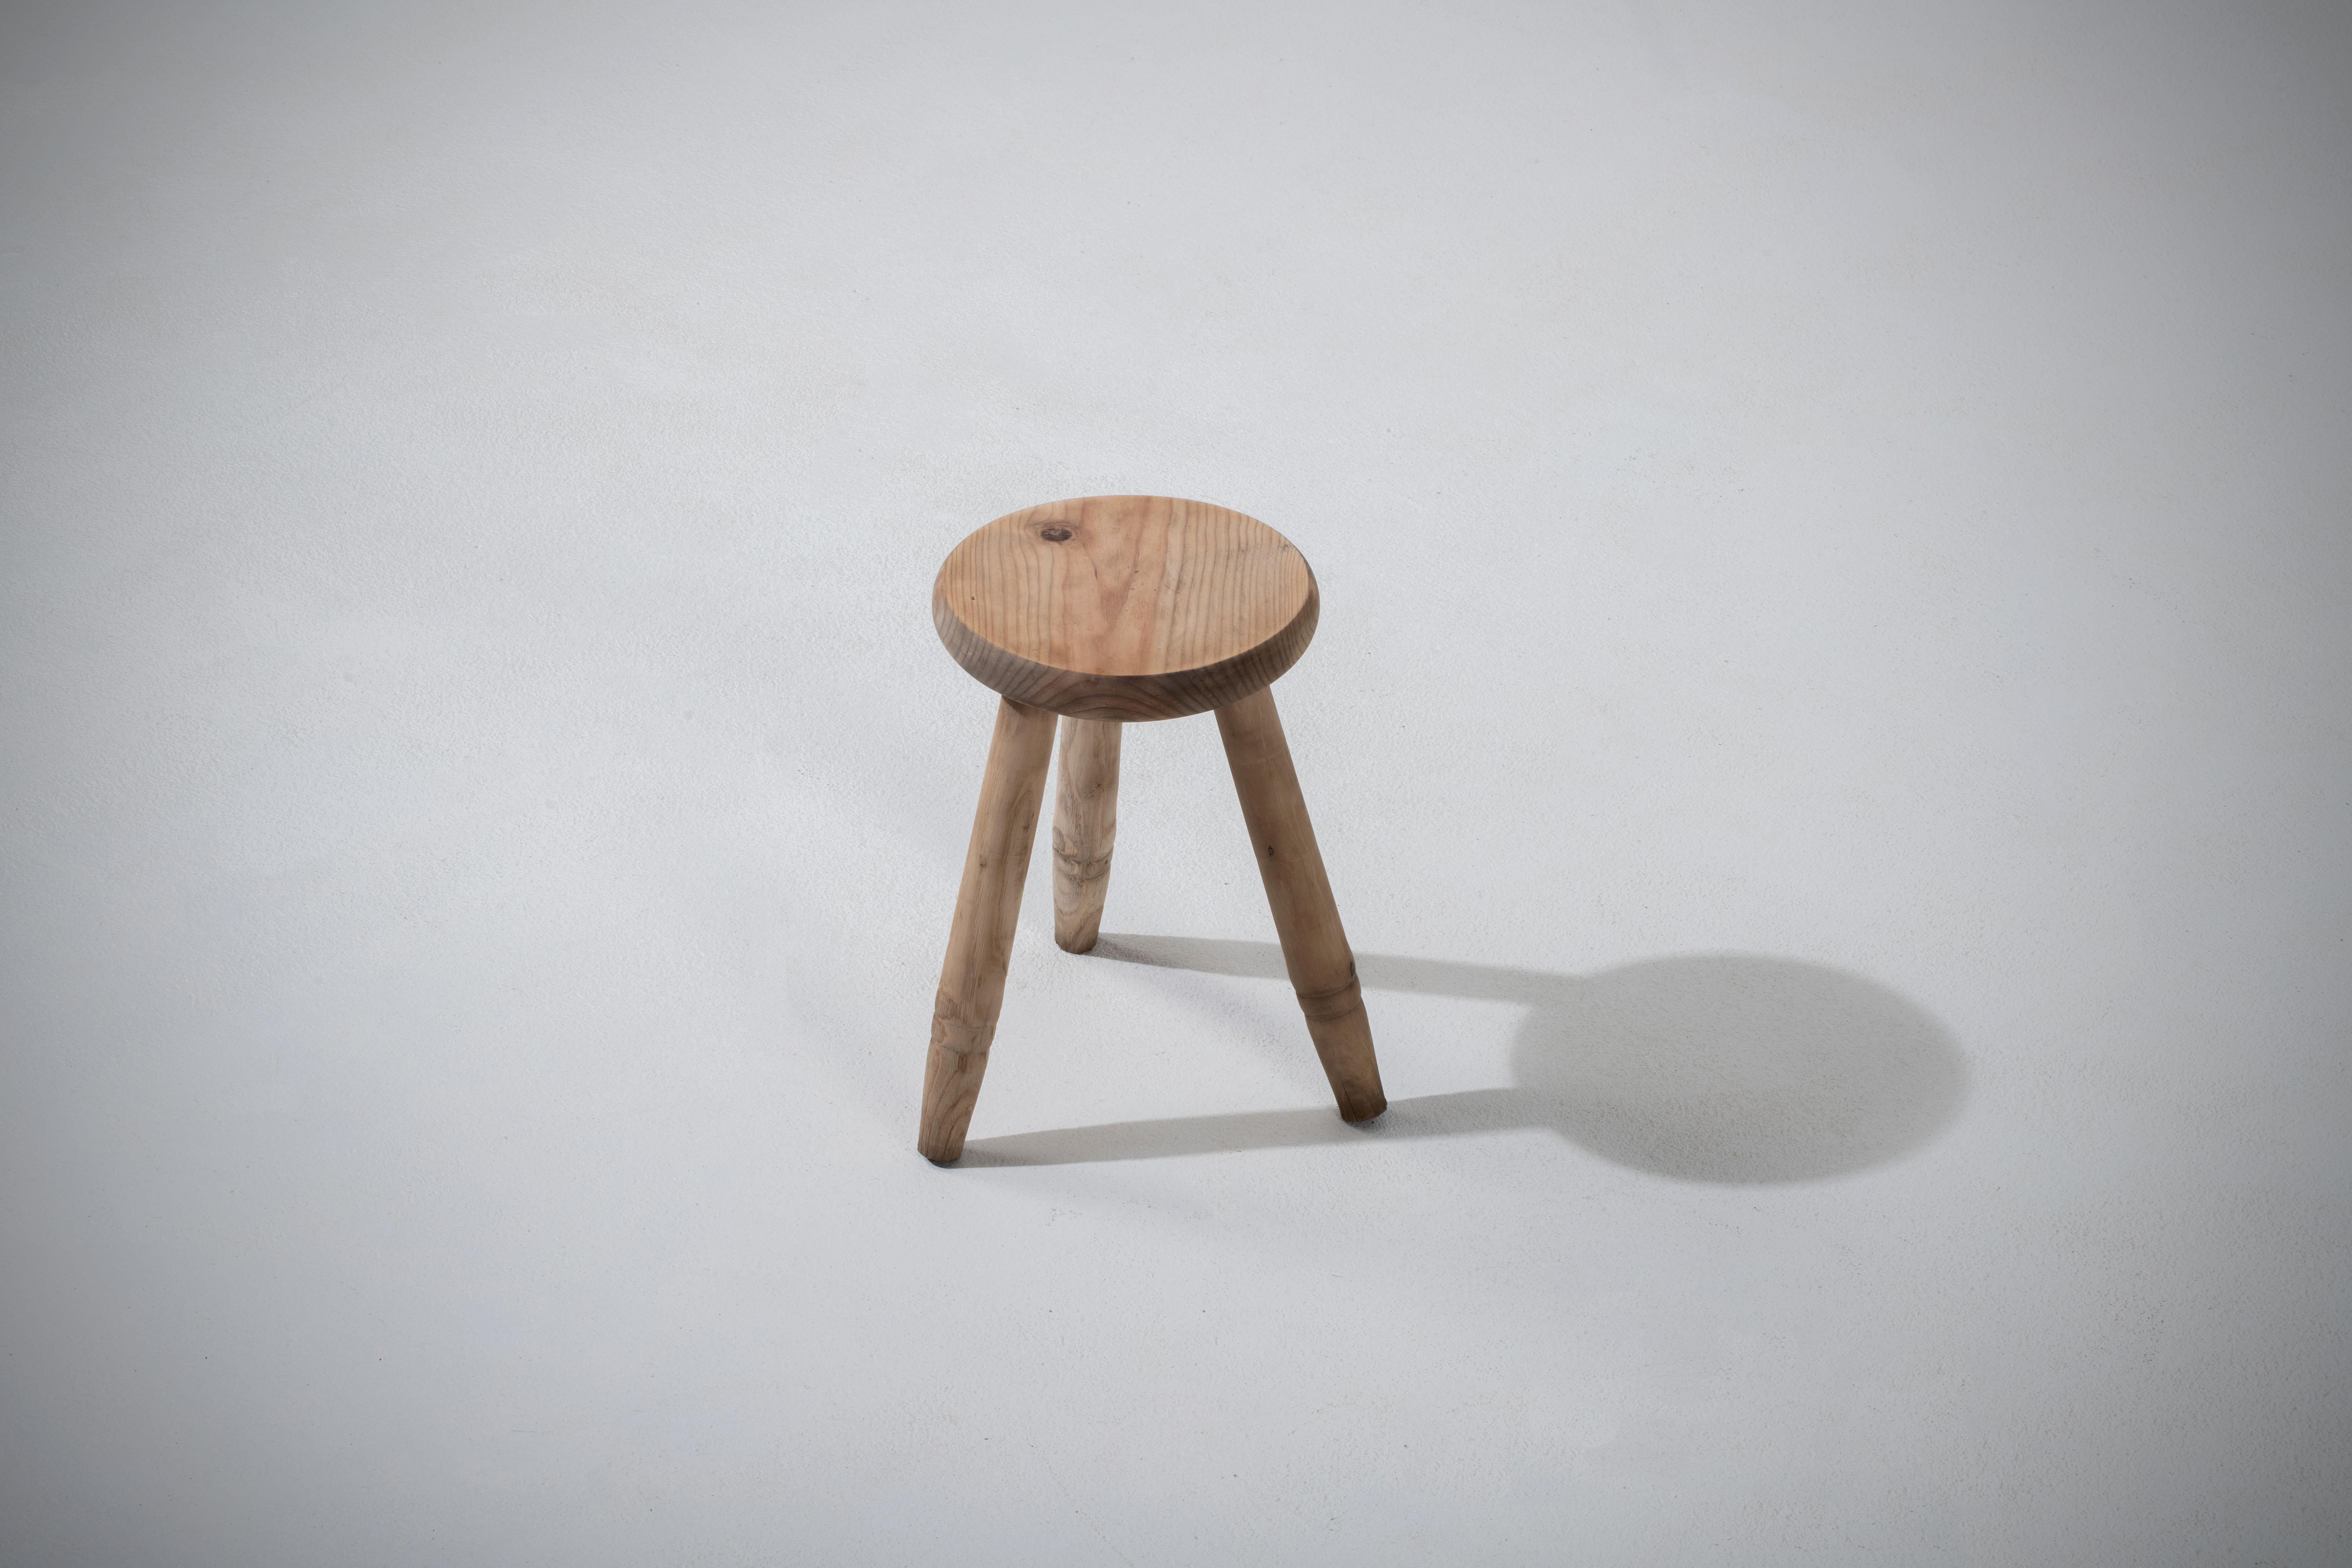 Midcentury Pine Stool with Tapered Legs, 1960s, France In Good Condition For Sale In Wiesbaden, DE